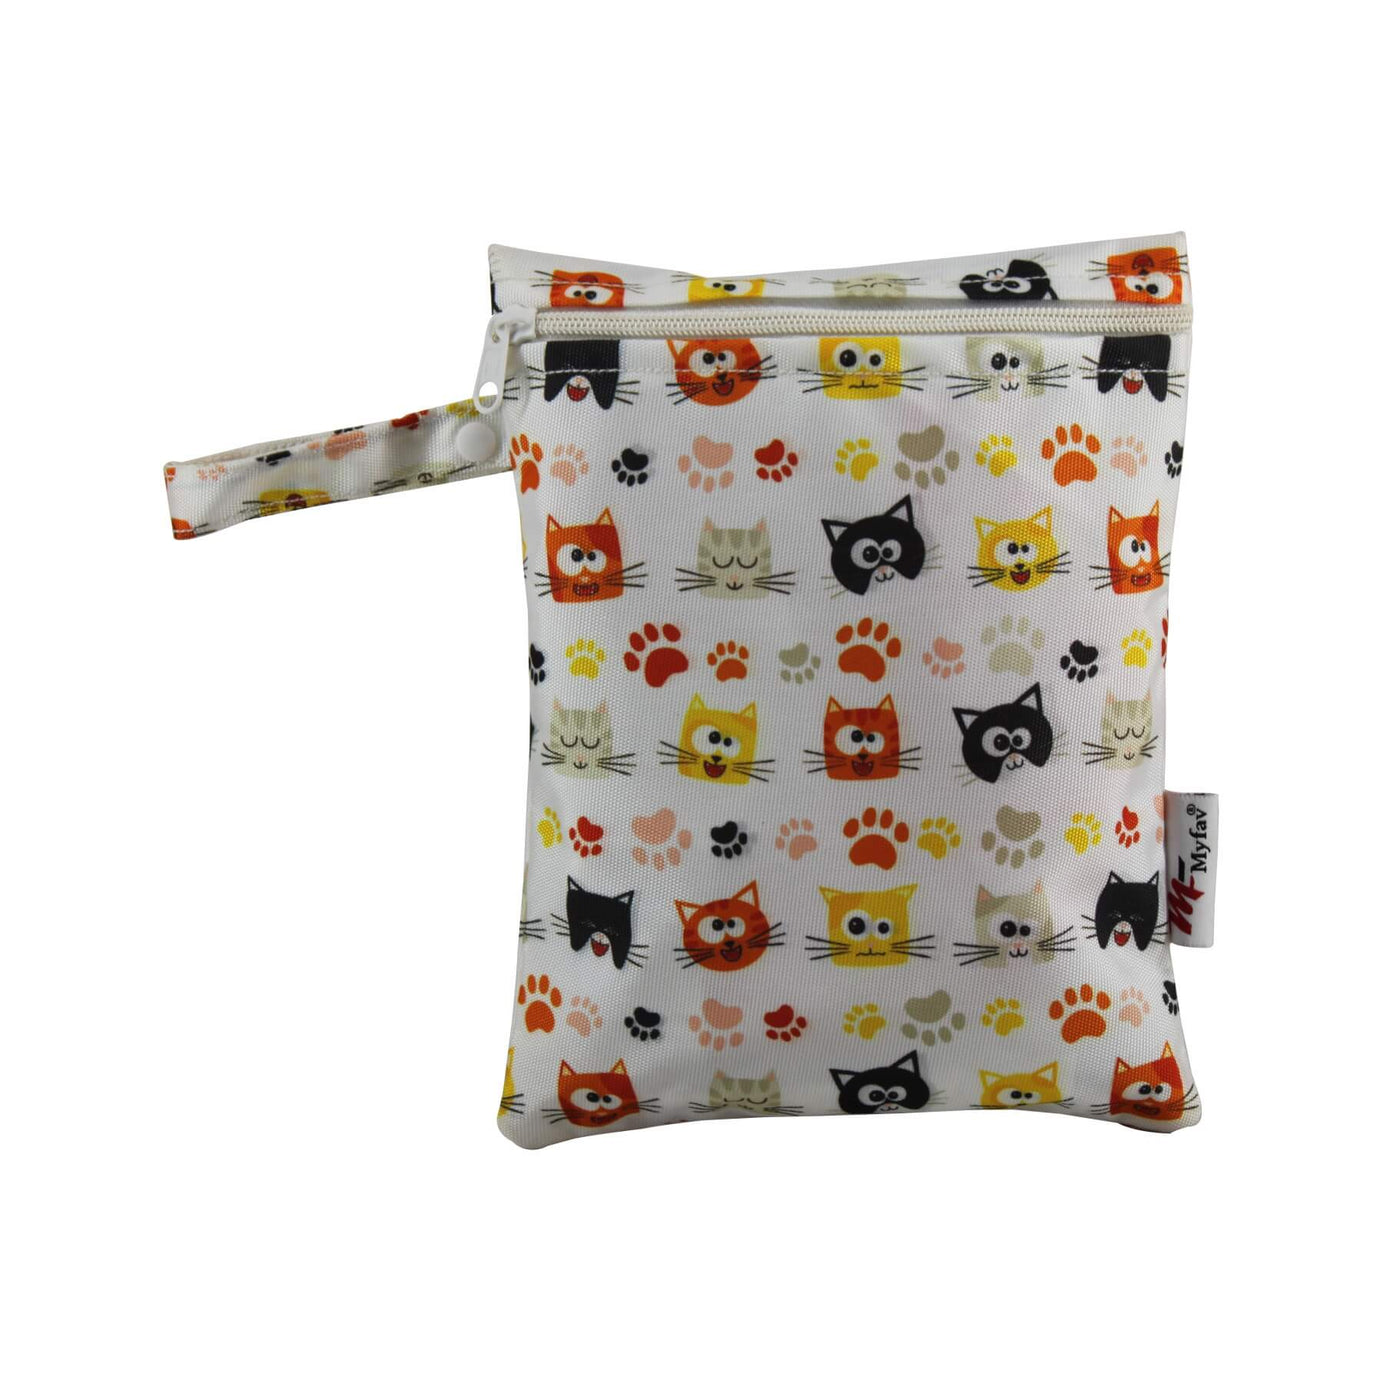 My Fav Cat Faces Print Multiutility Wet Dry Pouch/Diaper Bag/Travel Pouch/Travel Kit